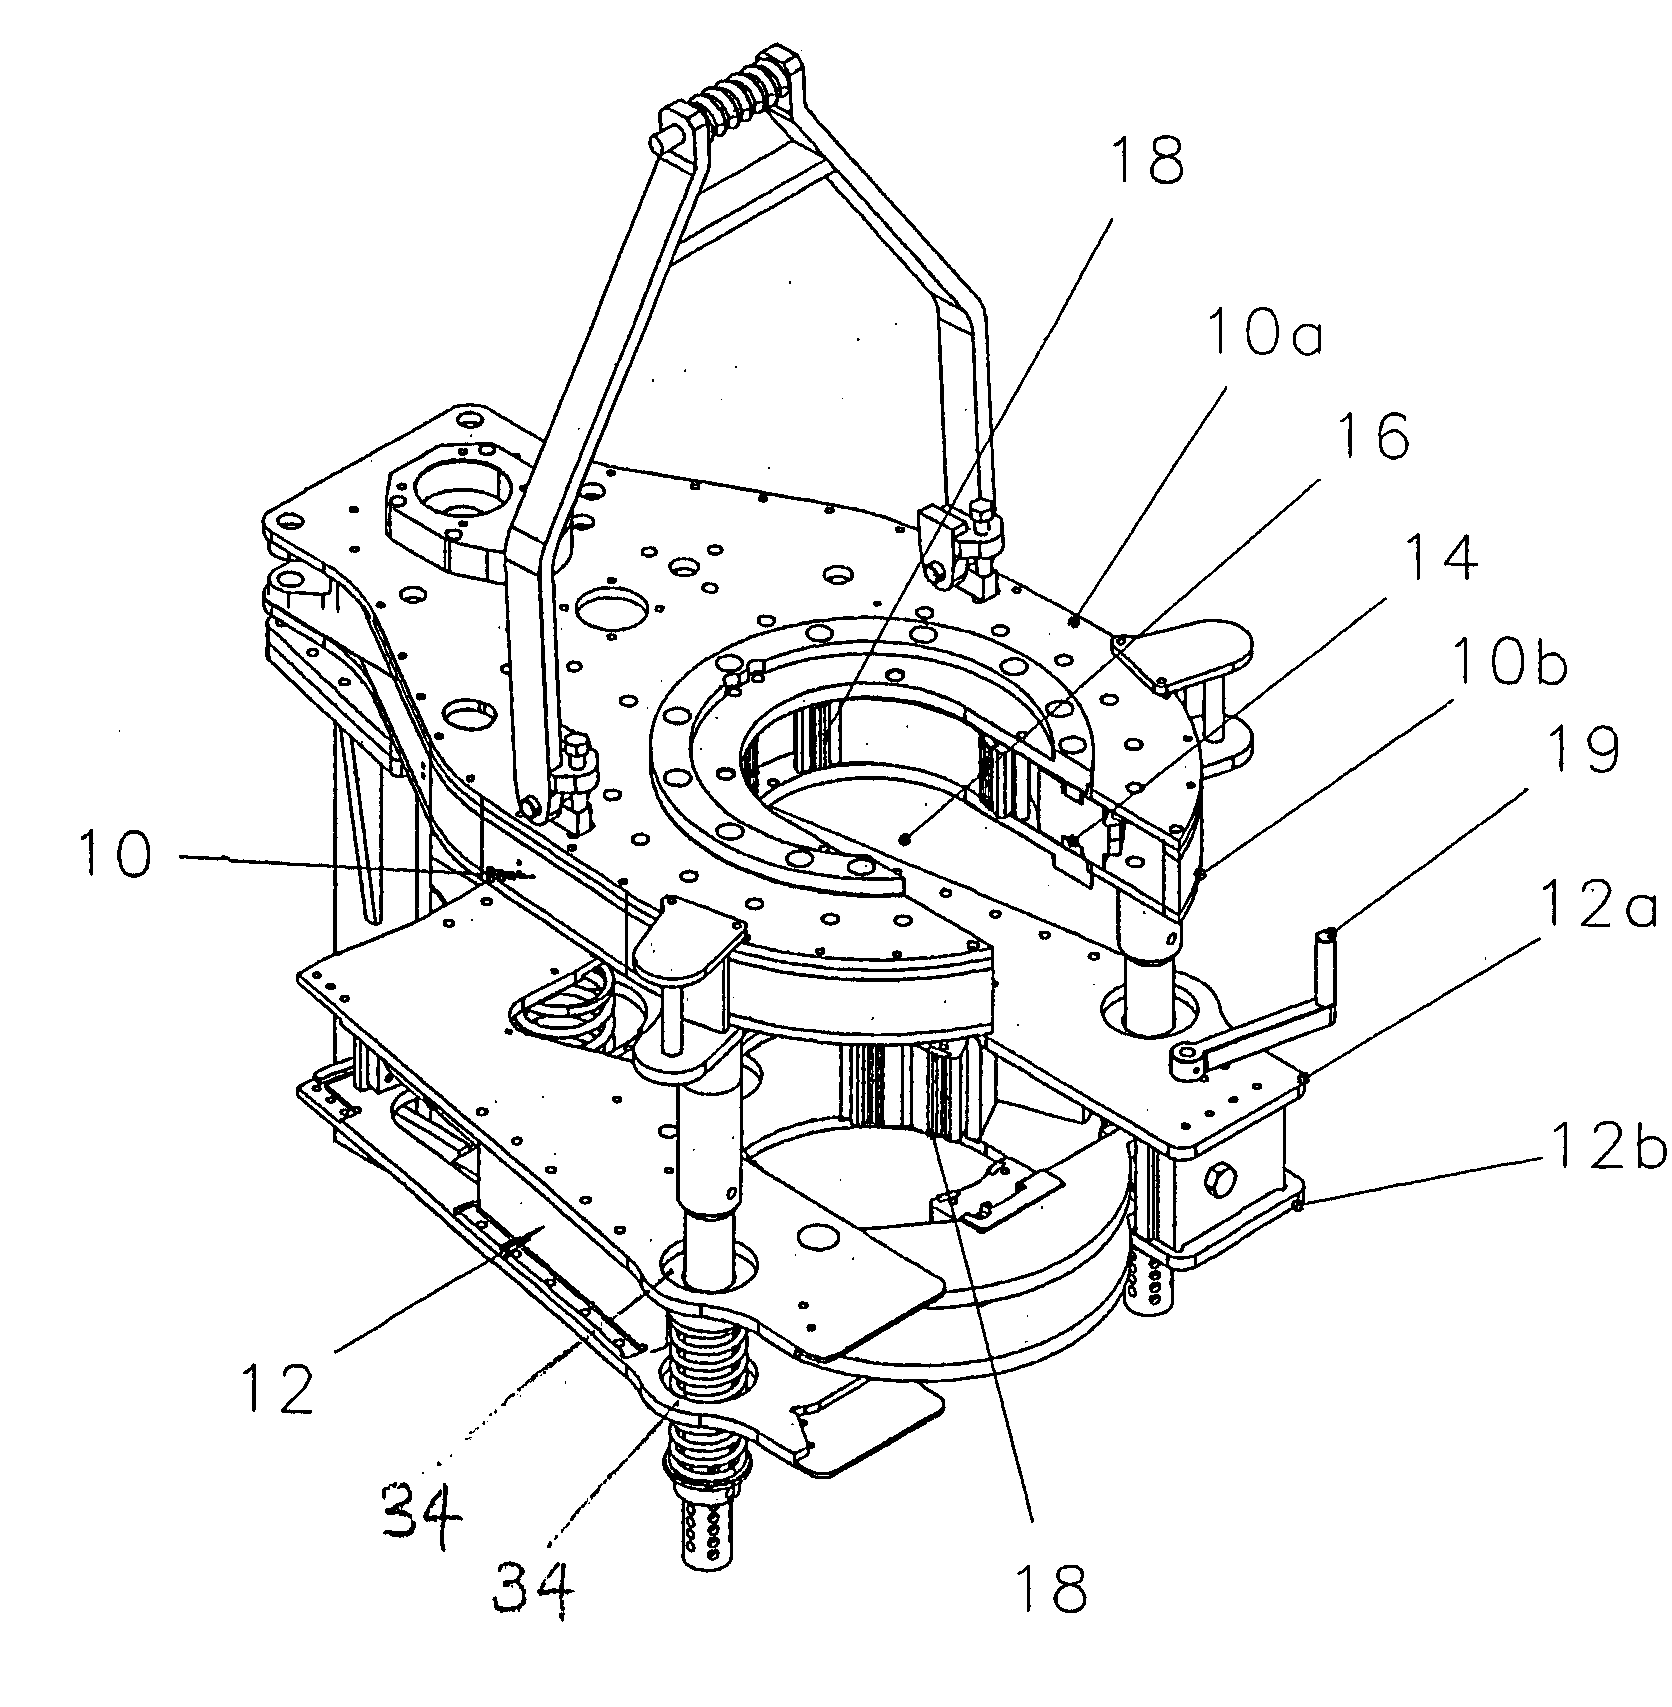 Support system for power tong assembly